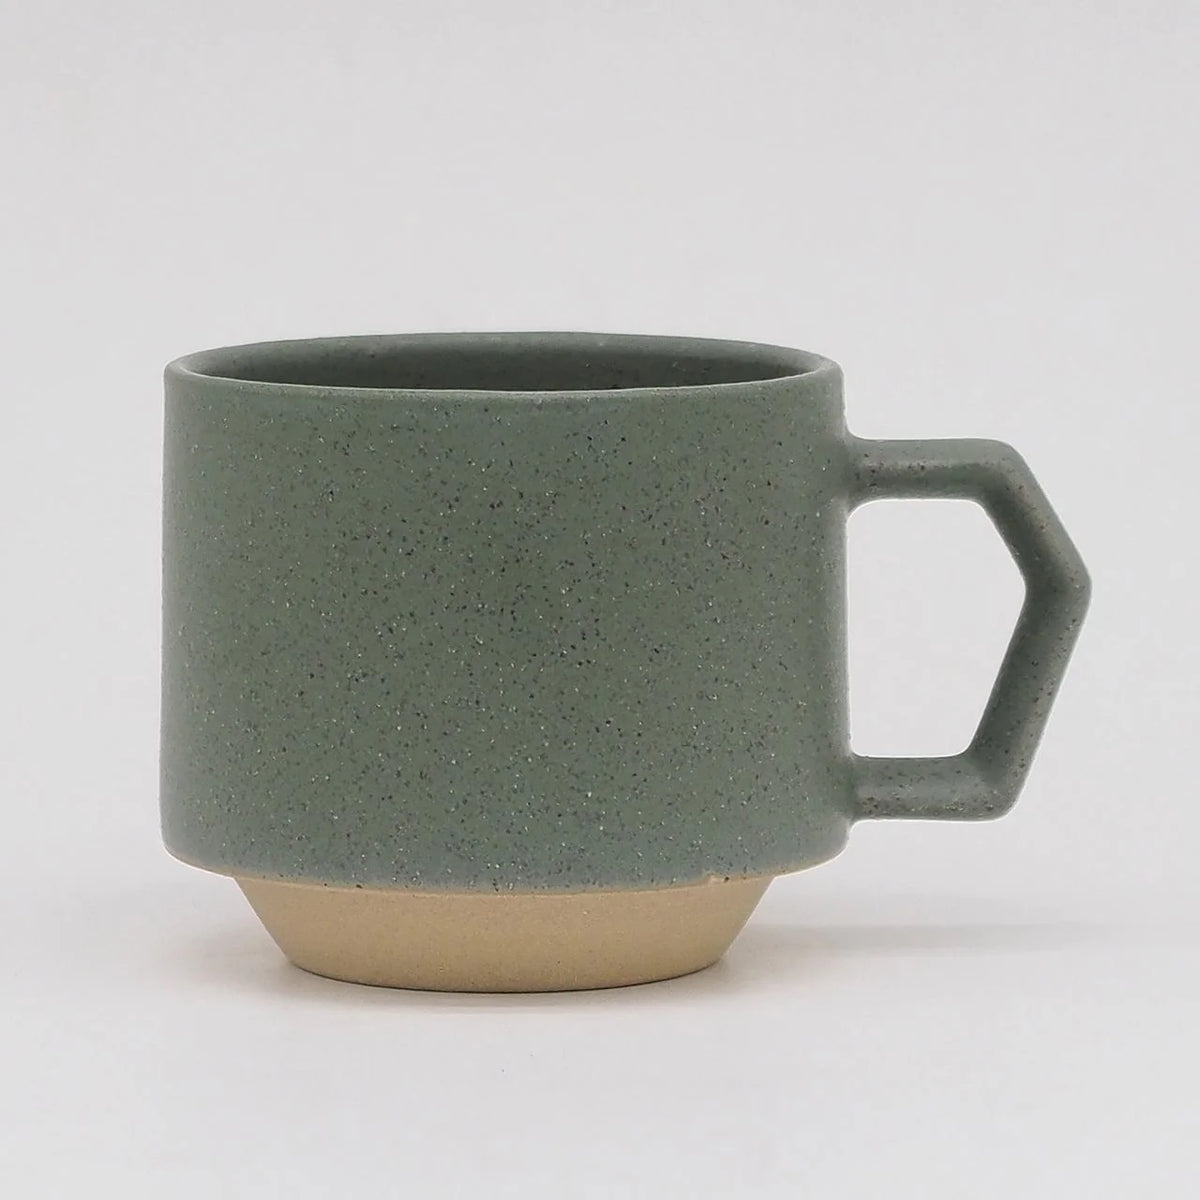 A Stacking Mug - Khaki with a handle on a white background. (Brand: CHIPS Inc.)